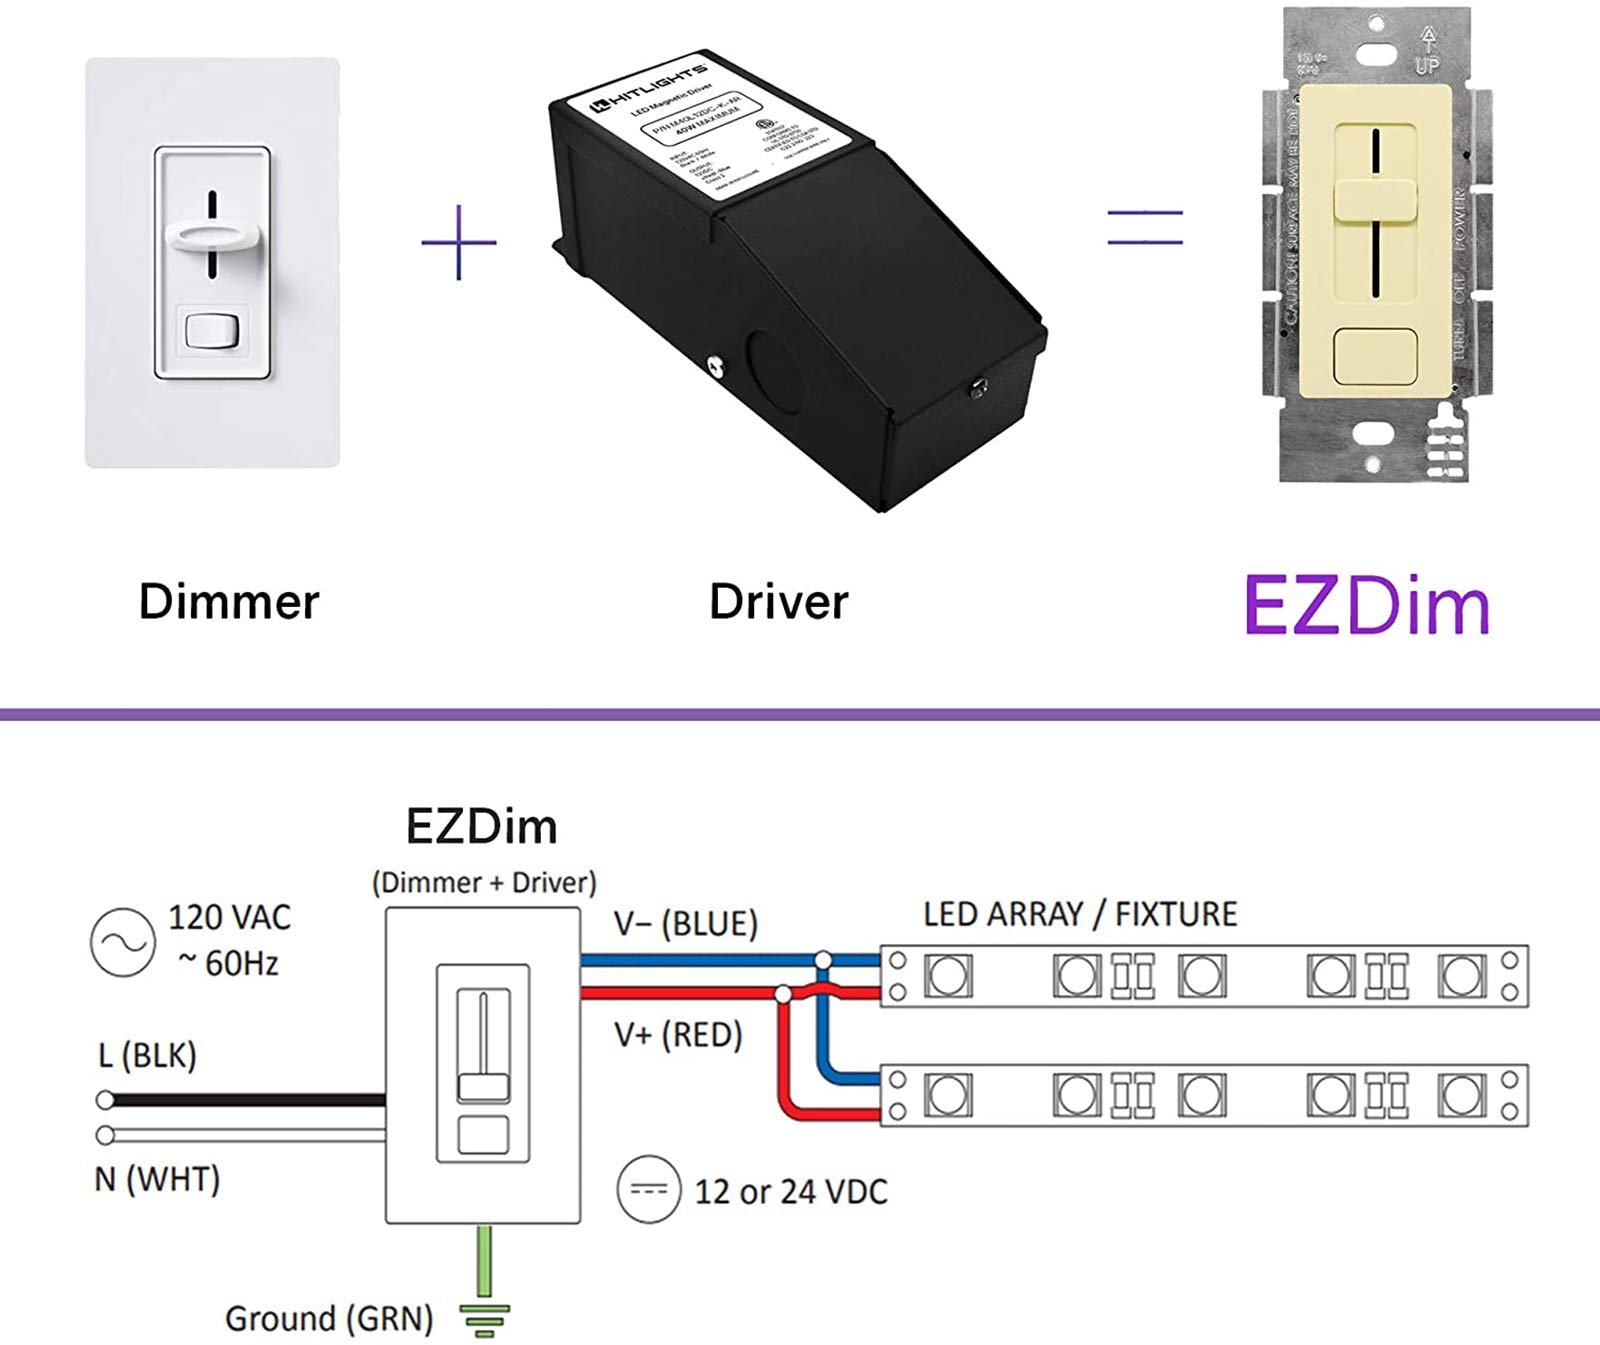 HitLights Dimmable Driver and Dimmer Switch Single Integrated Unit, EZDim 120V AC – 12 V DC 40Watt Wall Dimmer Switch Compatible with Most Solid Color 12V DC Tape Lights and Fixtures, UL Listed